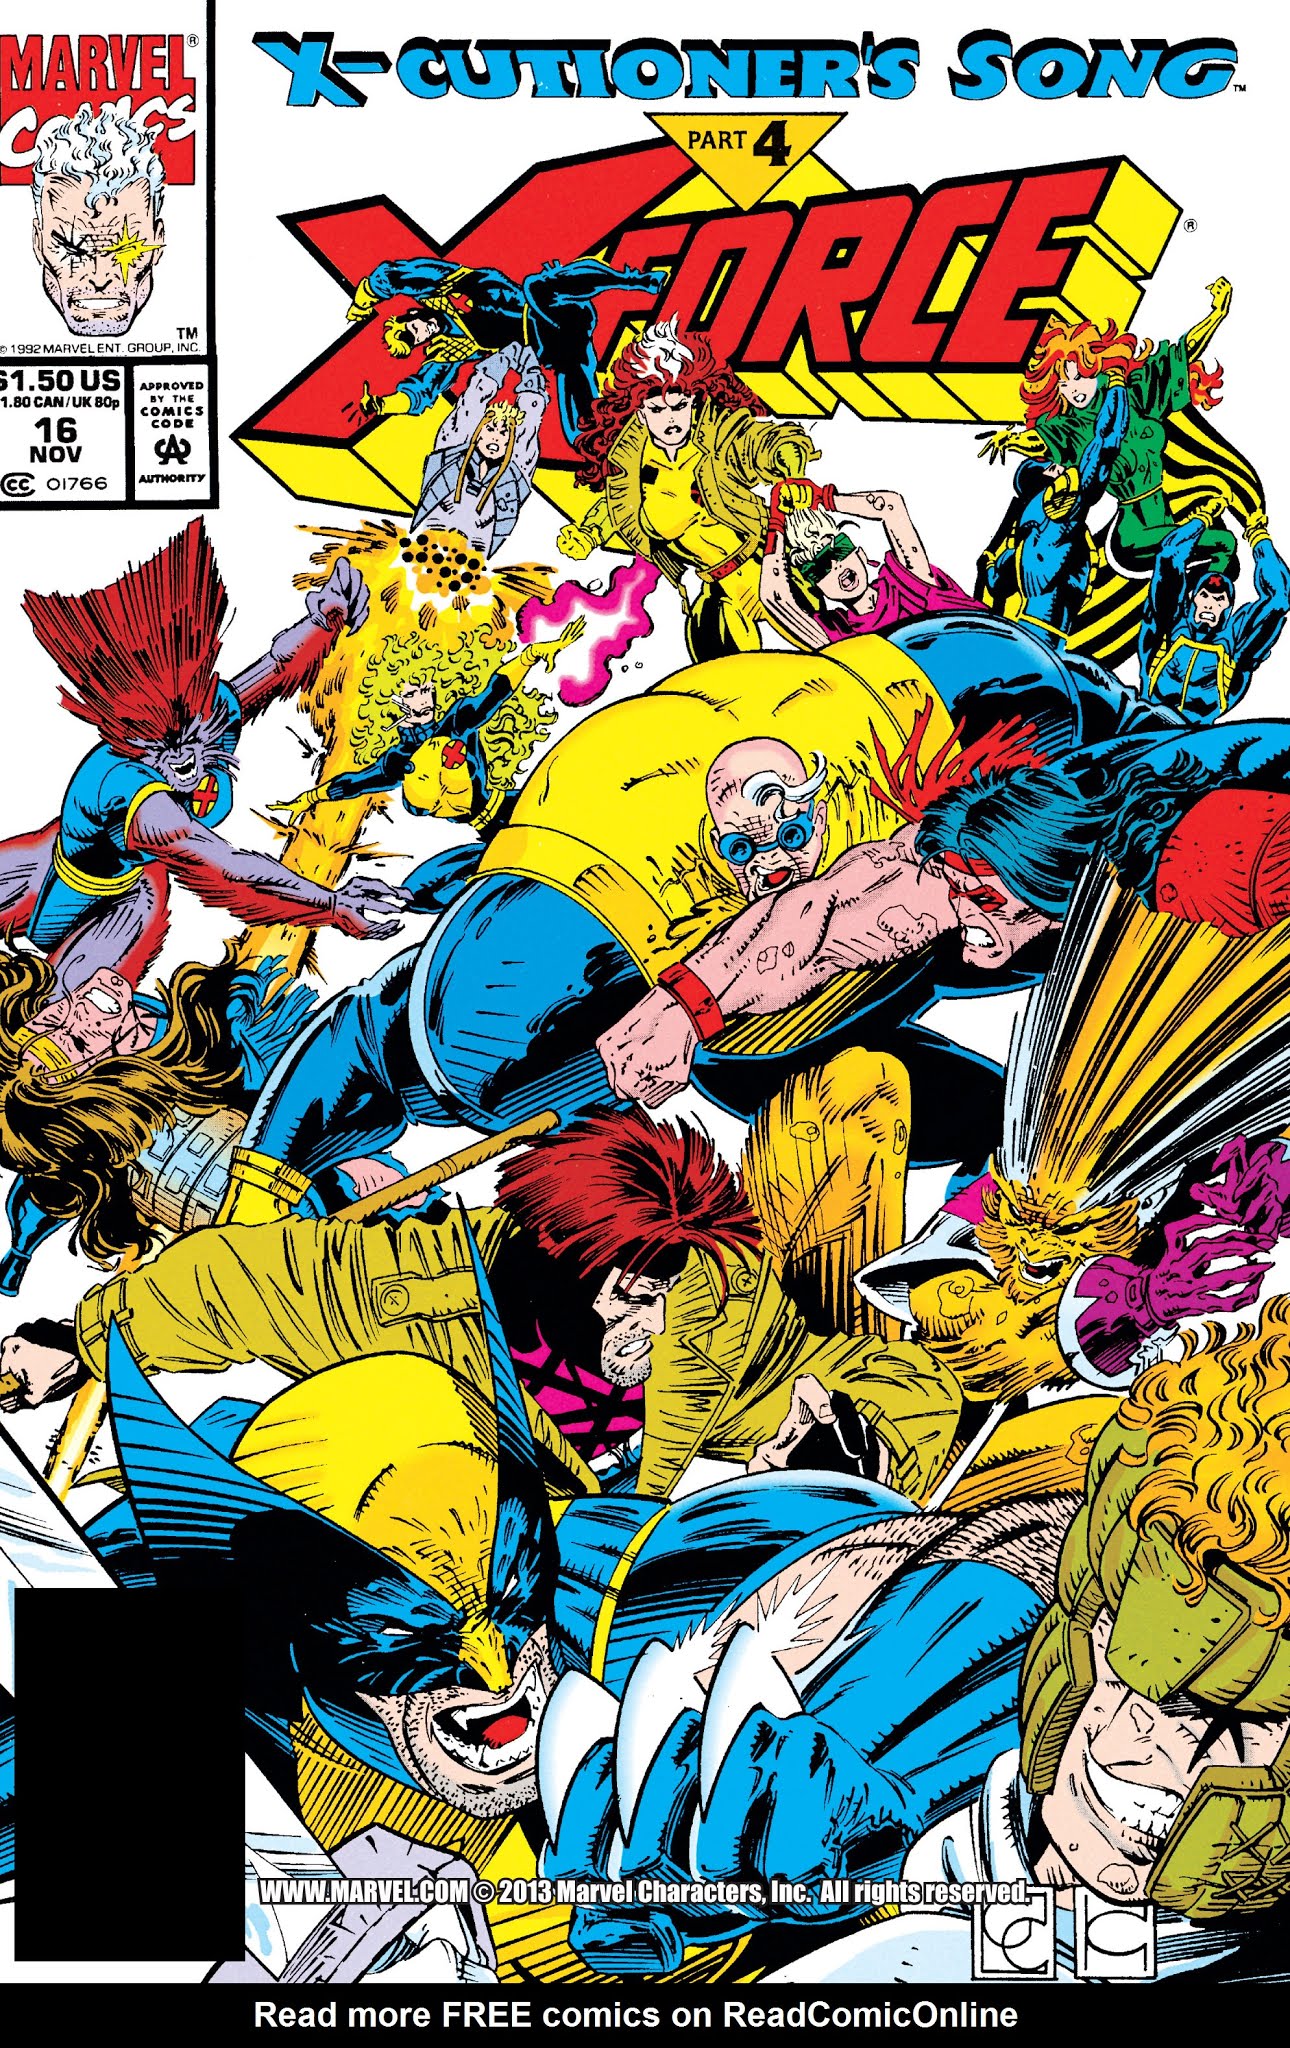 Read online X-Men: X-Cutioner's Song comic -  Issue # TPB - 74